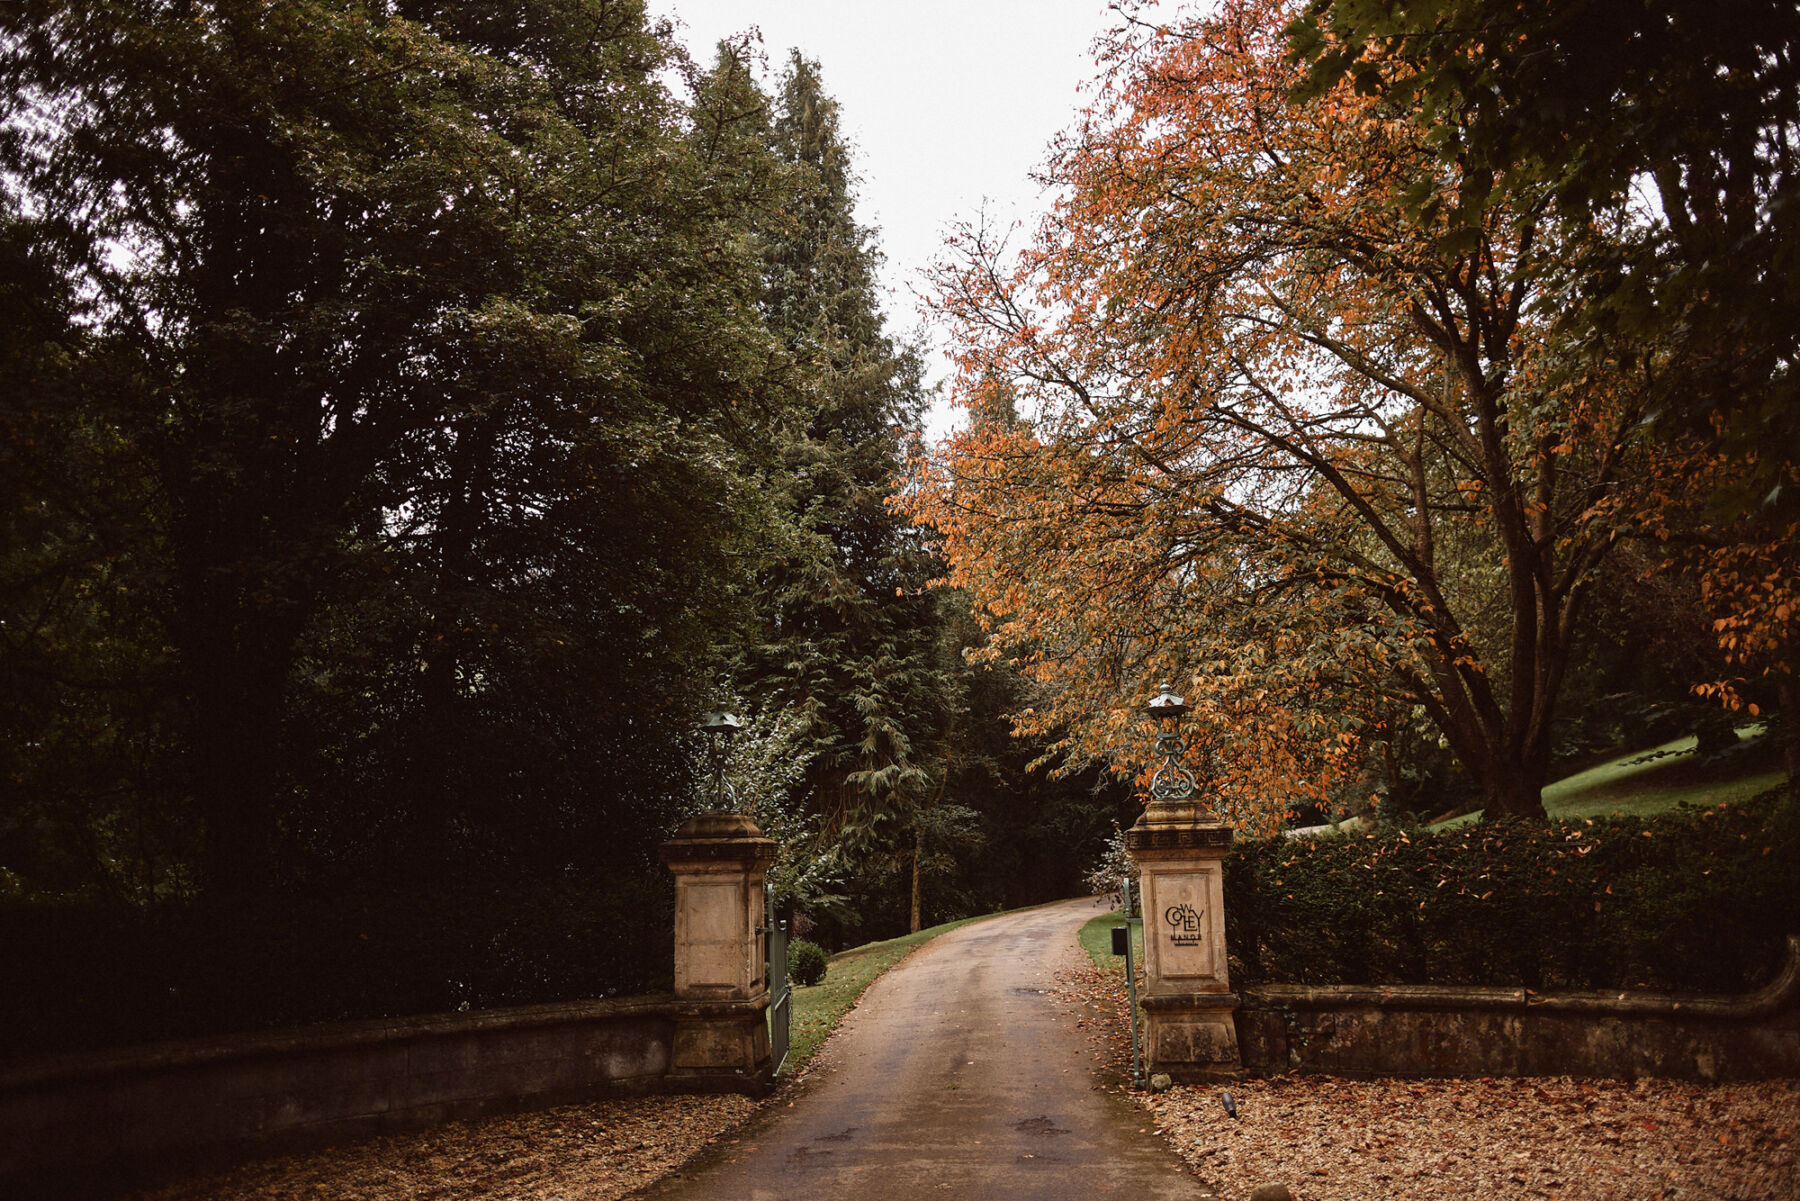 Entrance to Cowley Manor wedding venue in The Cotswolds. September wedding so Autumn leaves falling to the ground.